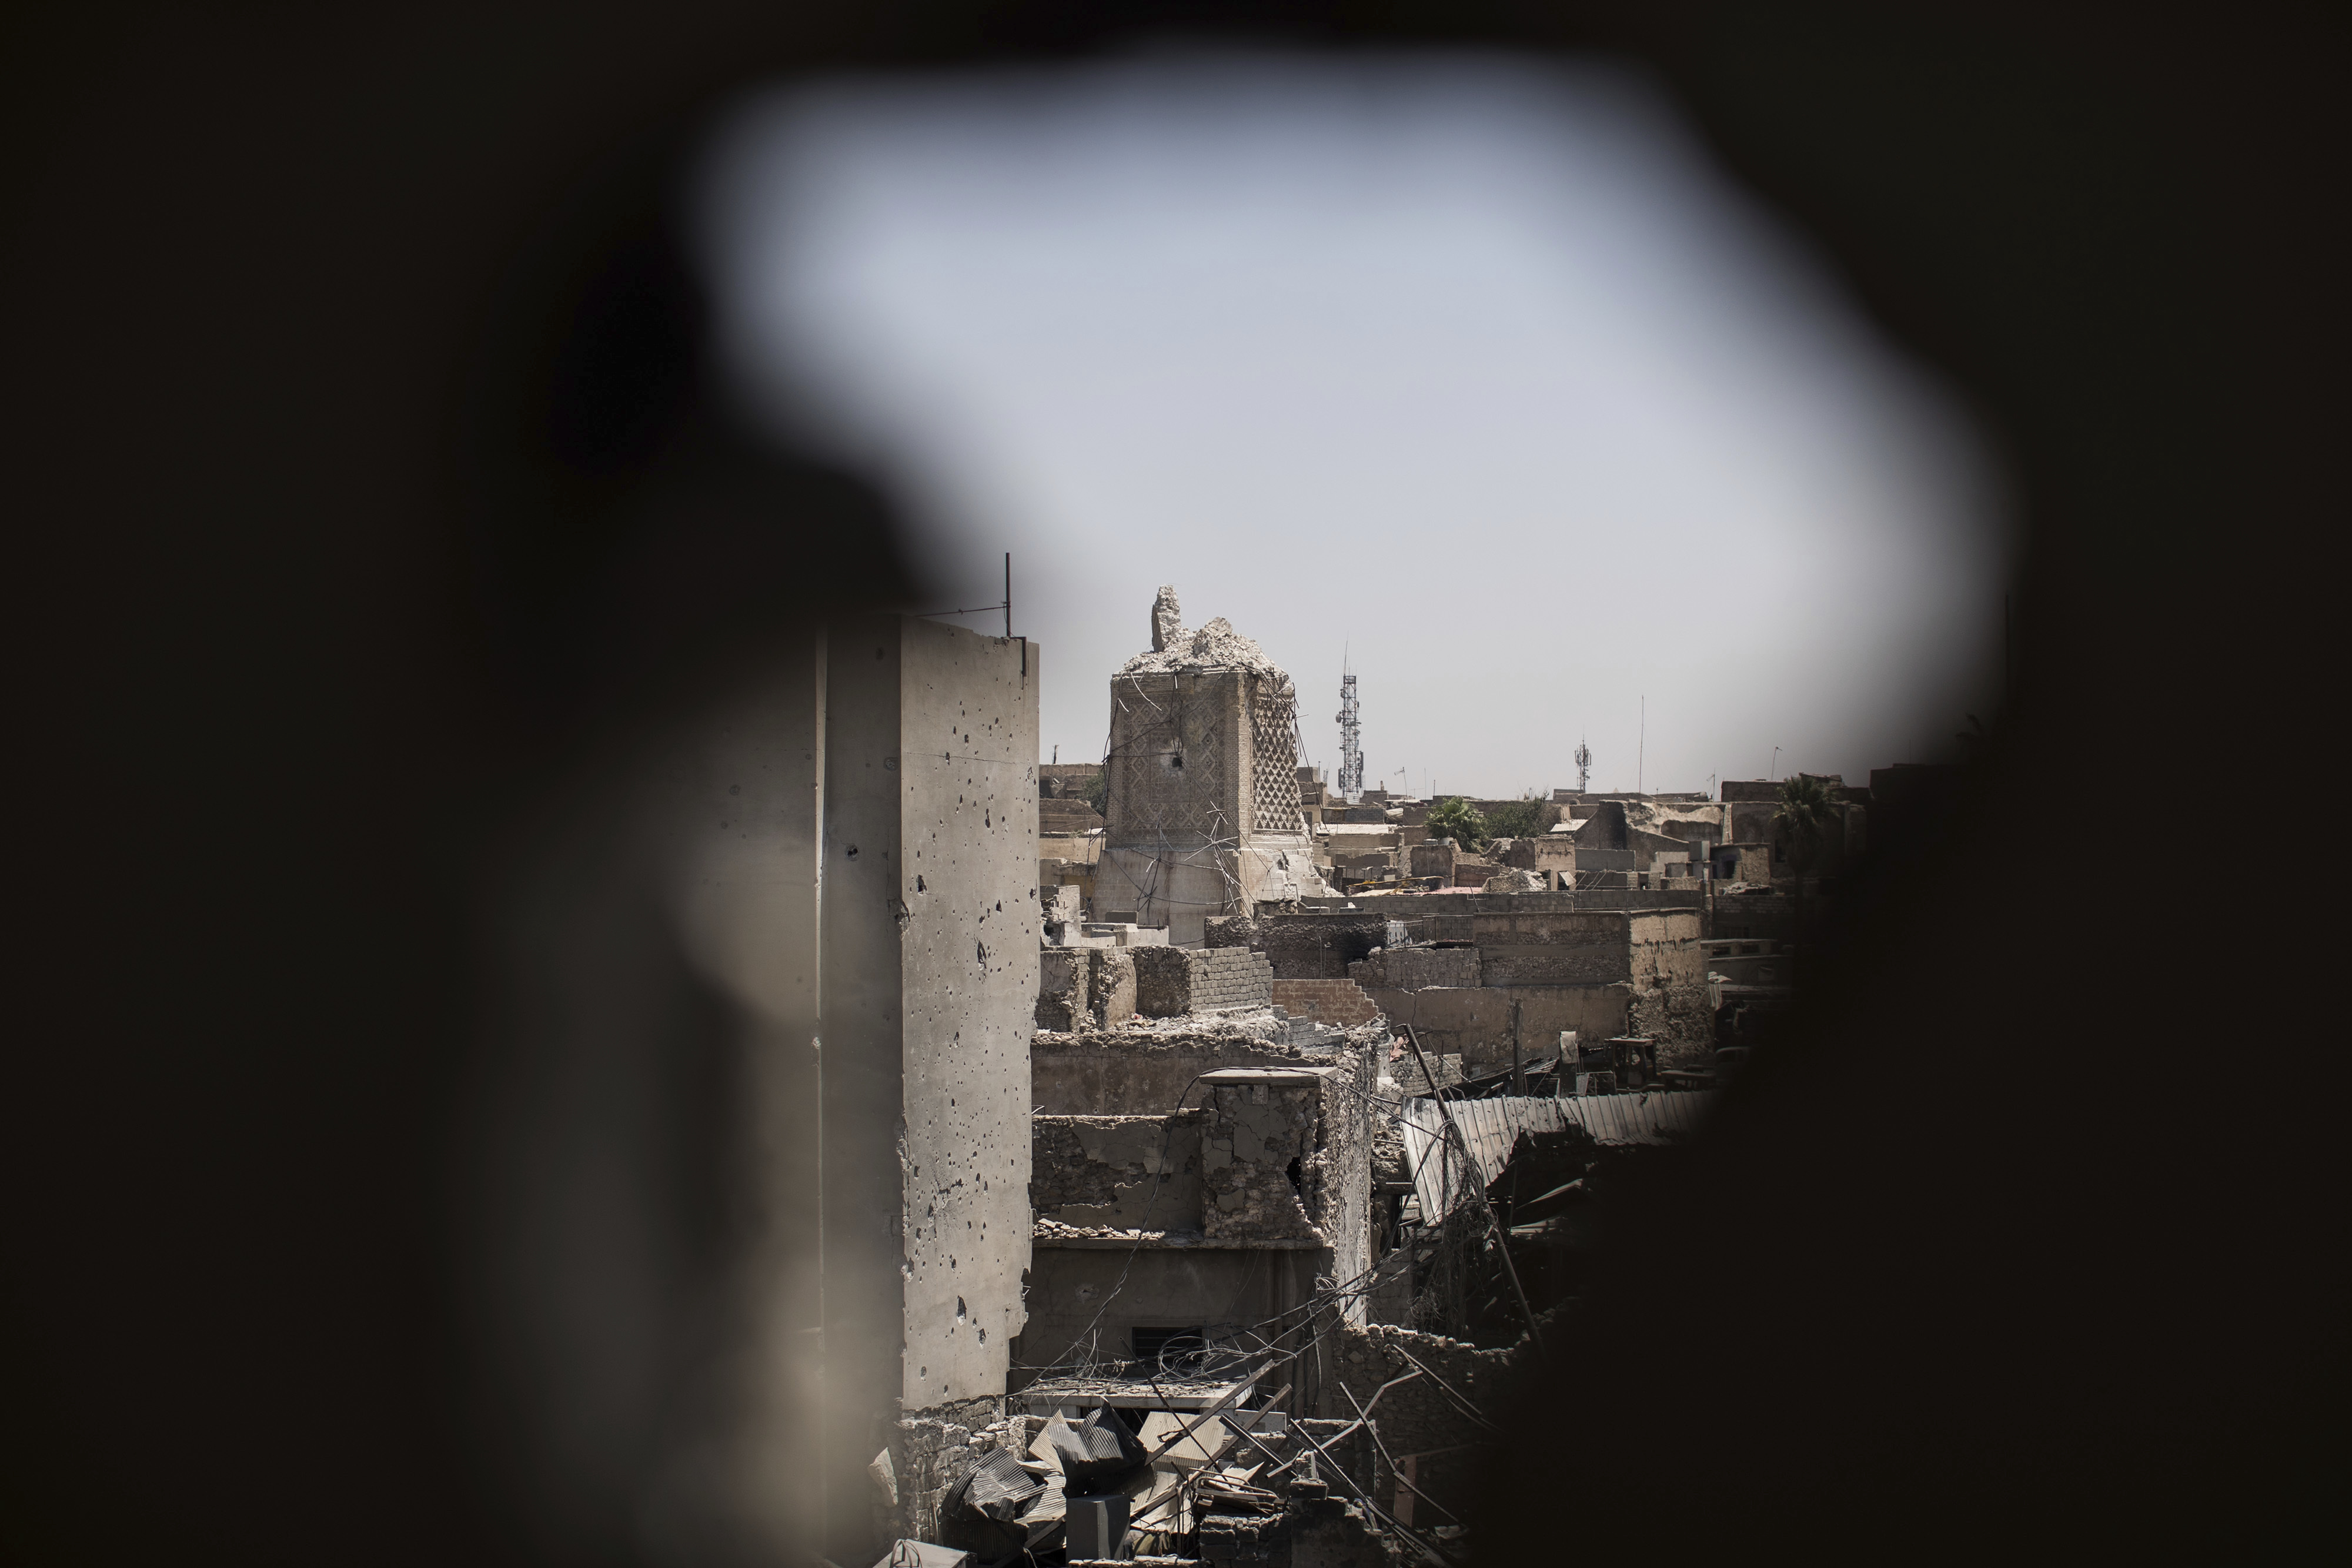 The destroyed al-Nuri mosque is seen through a hole in the wall of a house retaken by Iraqi Special Forces during fighting against Islamic State militants in the Old City of Mosul, Iraq, Tuesday, June 27, 2017. An Iraqi officer says counterattacks by Islamic State militants on the western edge of Mosul have stalled Iraqi forces' push in the Old City _ the last IS stronghold in the city. (AP Photo/Felipe Dana)